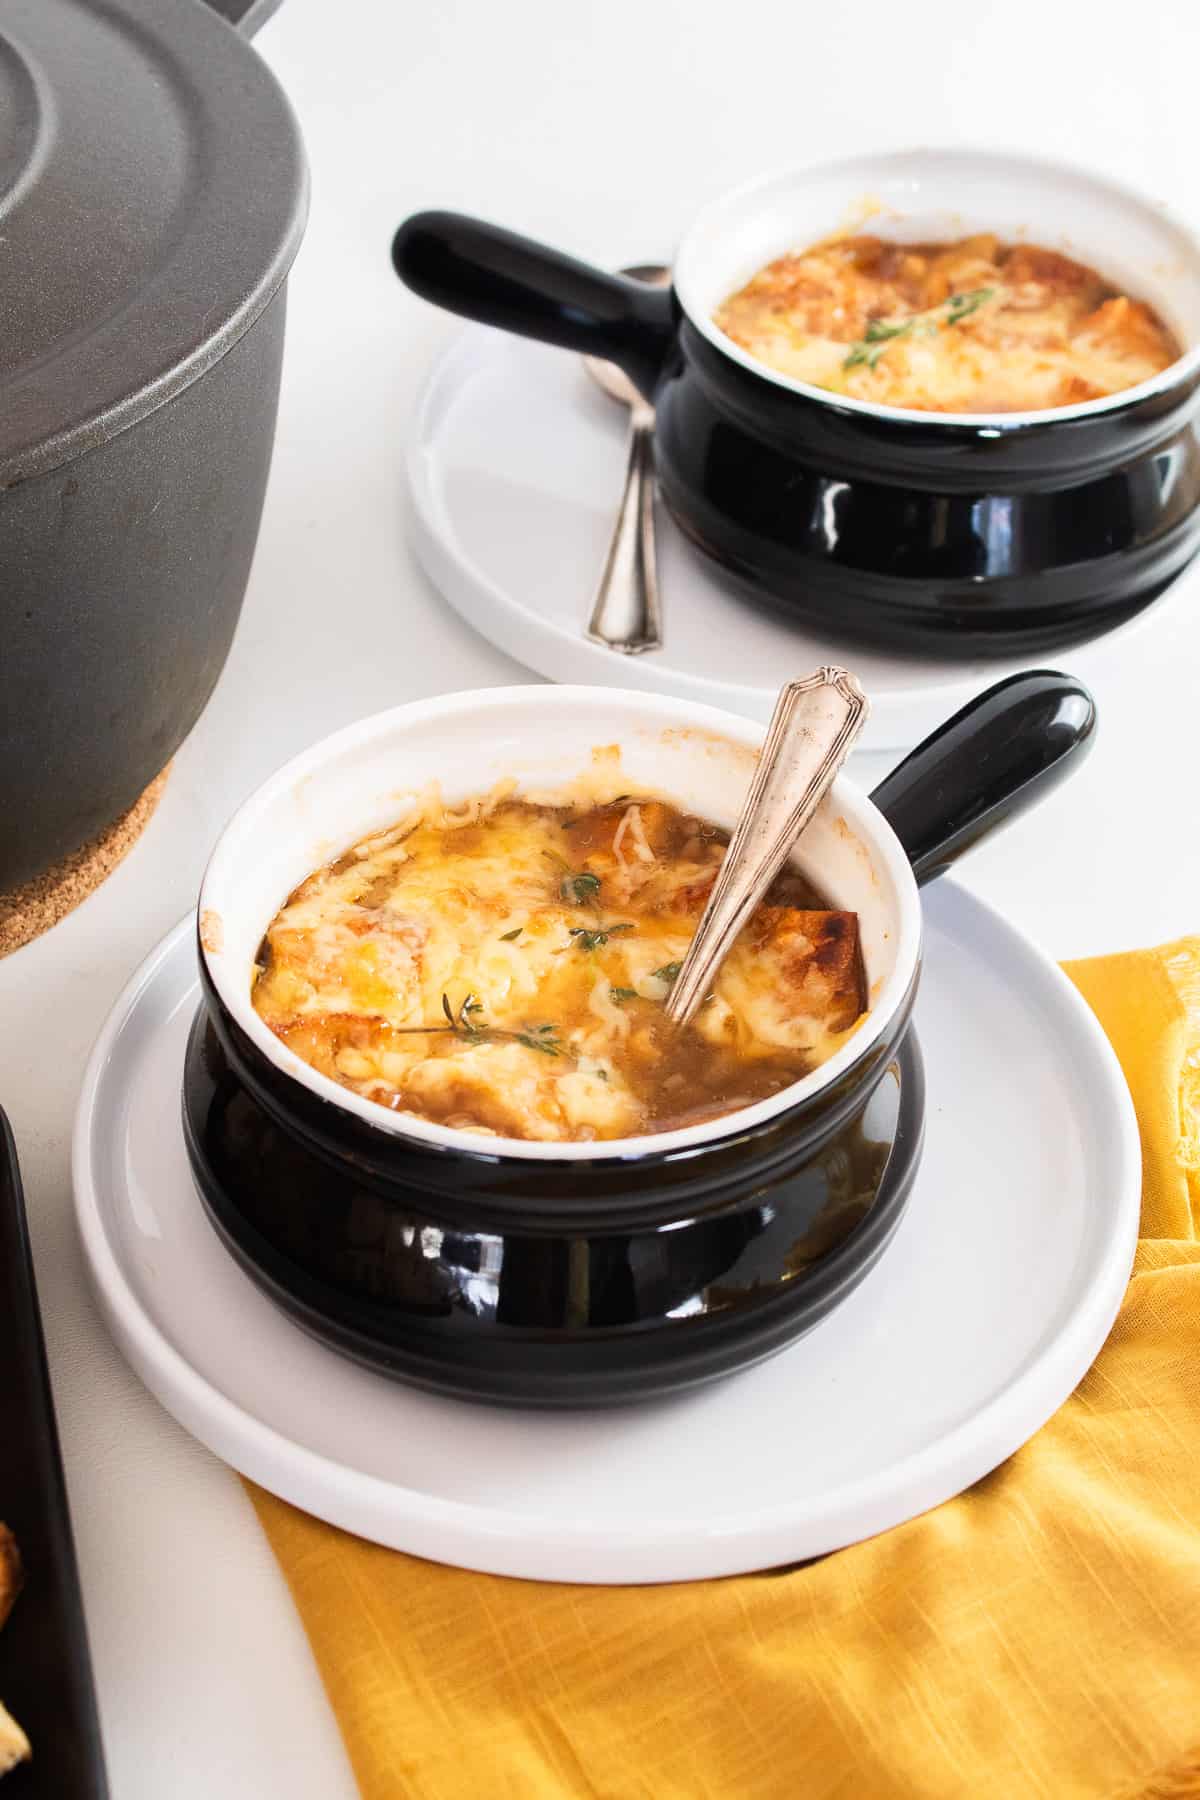 Two black handled bowls are filled with soup, croutons, and cheese and topped with thyme sprigs.